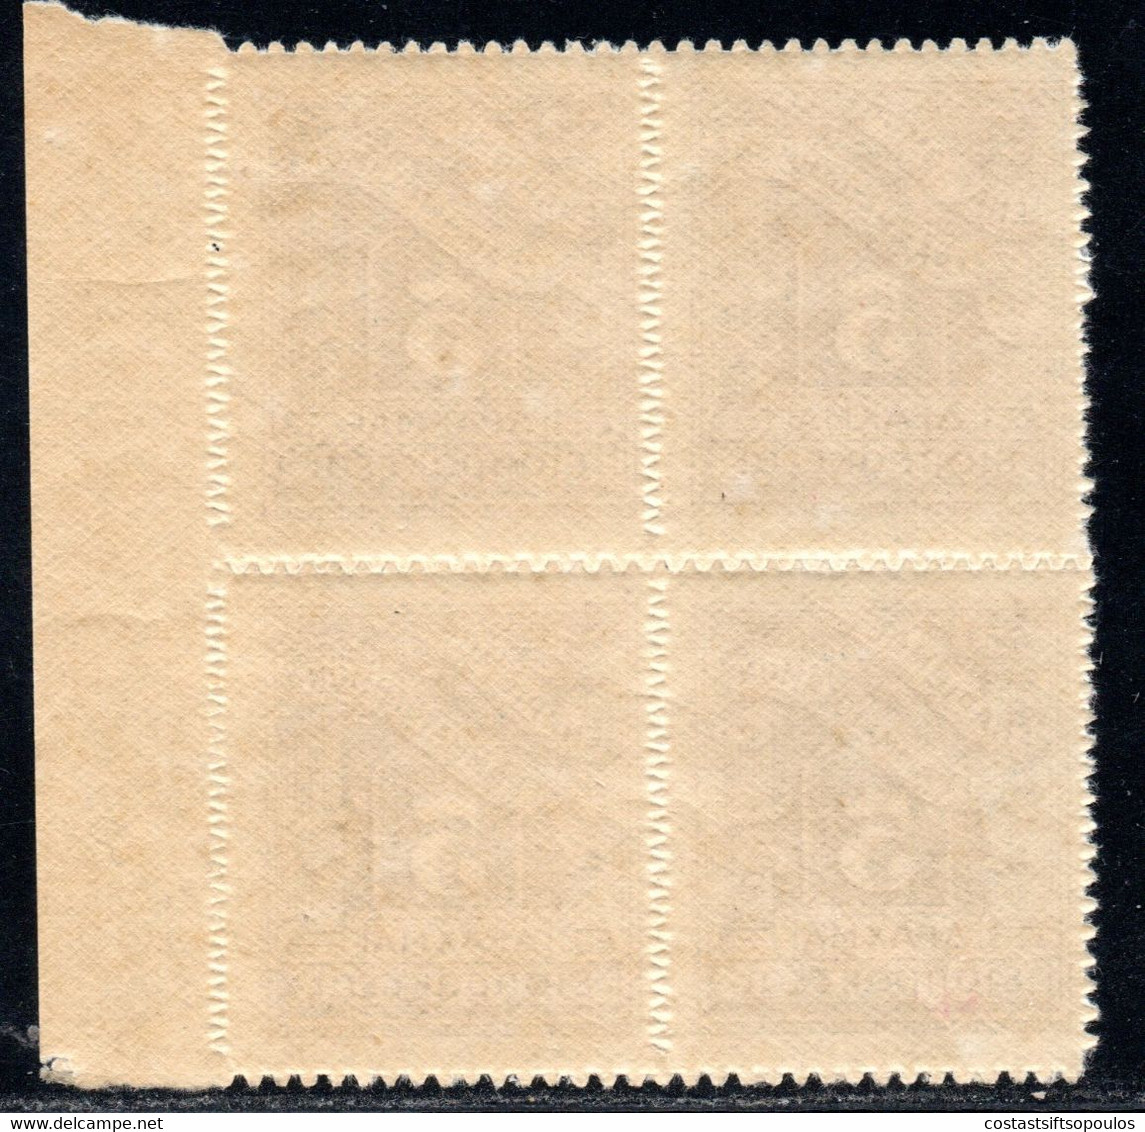 1395. GREECE.1913-1928 POSTAGE DUE. 5 DR. MNH BLOCK OF 4  VERY FINE AND FRESH. - Neufs